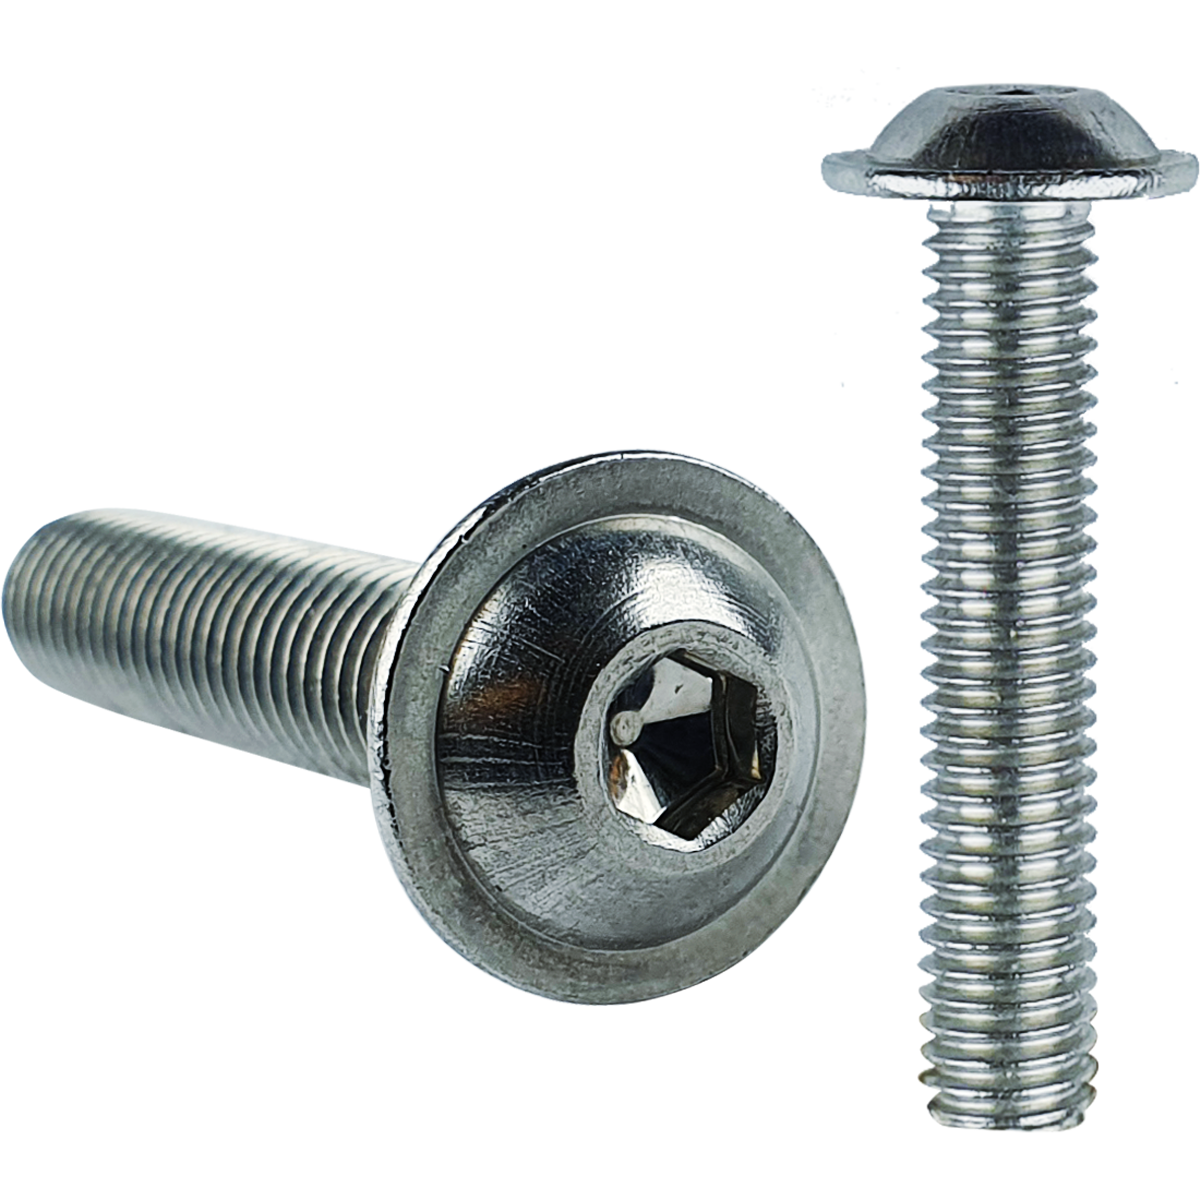 Metric - Flanged, button head machine screws available in a variety of sizes at competitive prices.